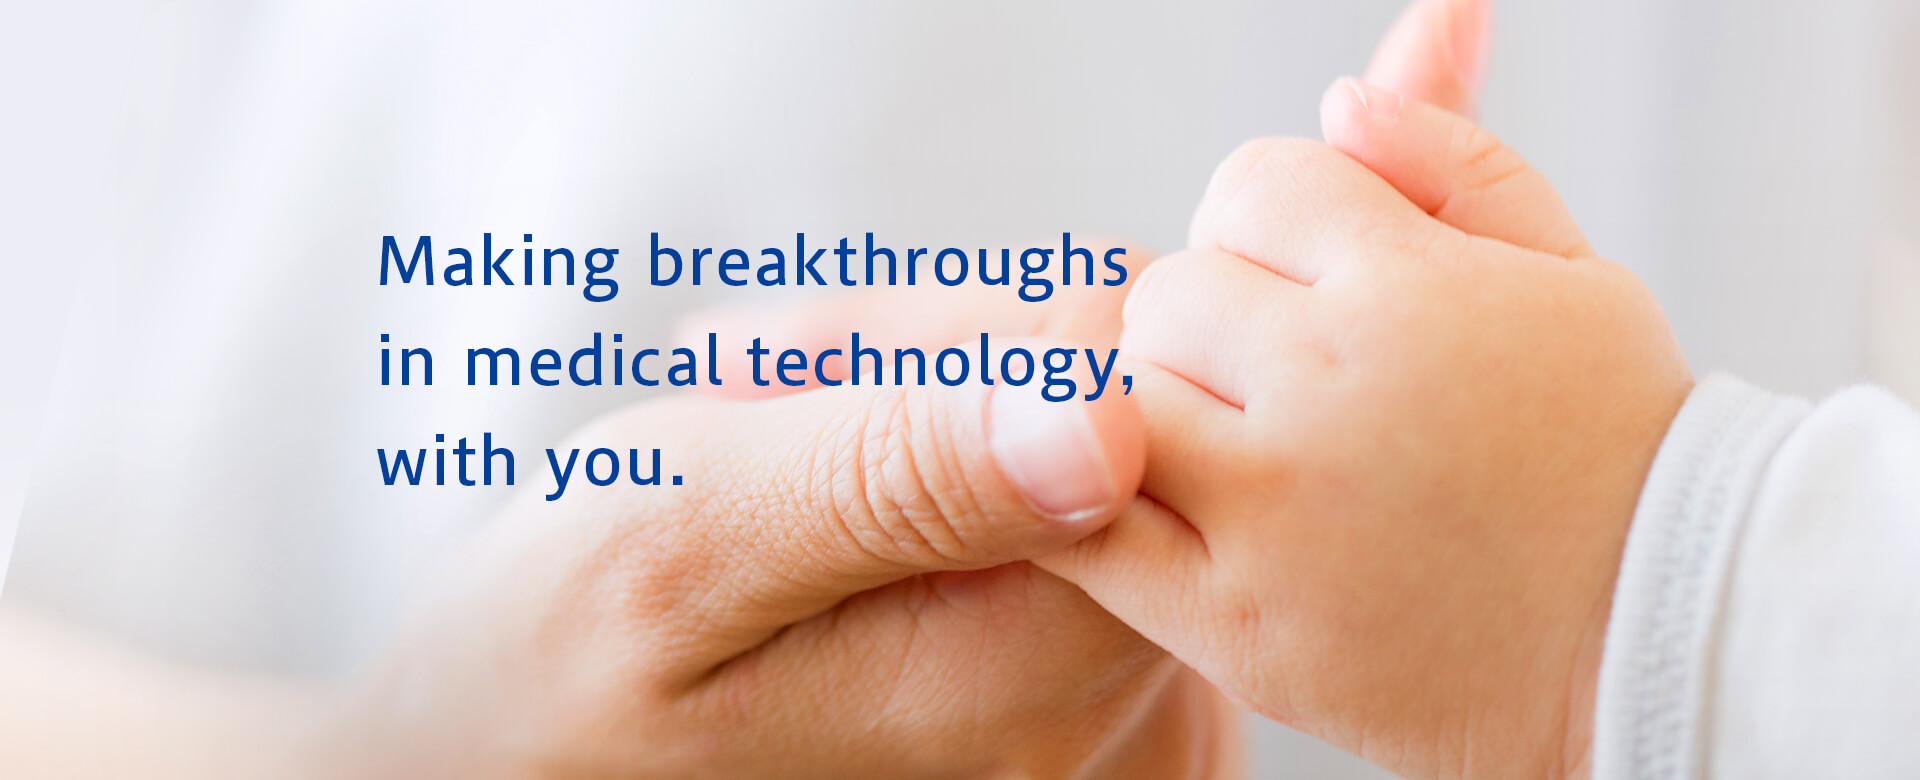 Making breakthroughs　in medical technology,　with you.